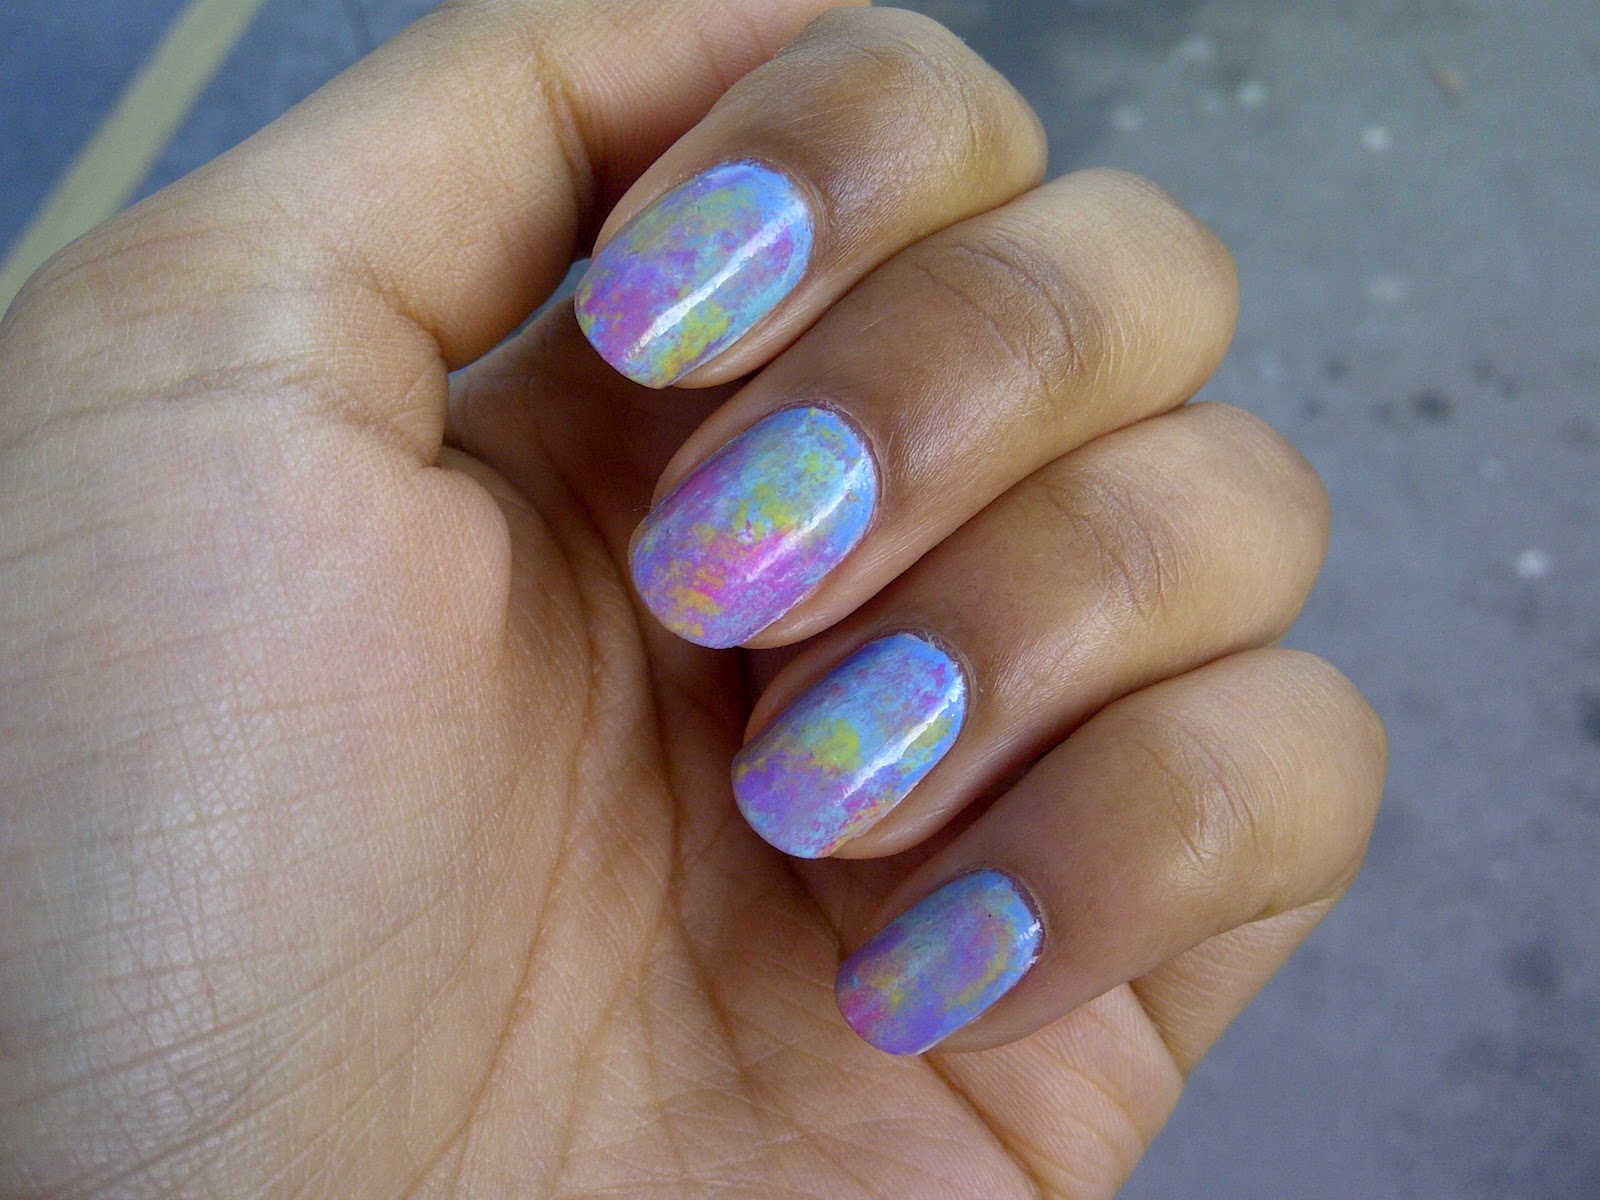 7. Pink and Blue Tie Dye Nails with Abstract Nail Art - wide 10